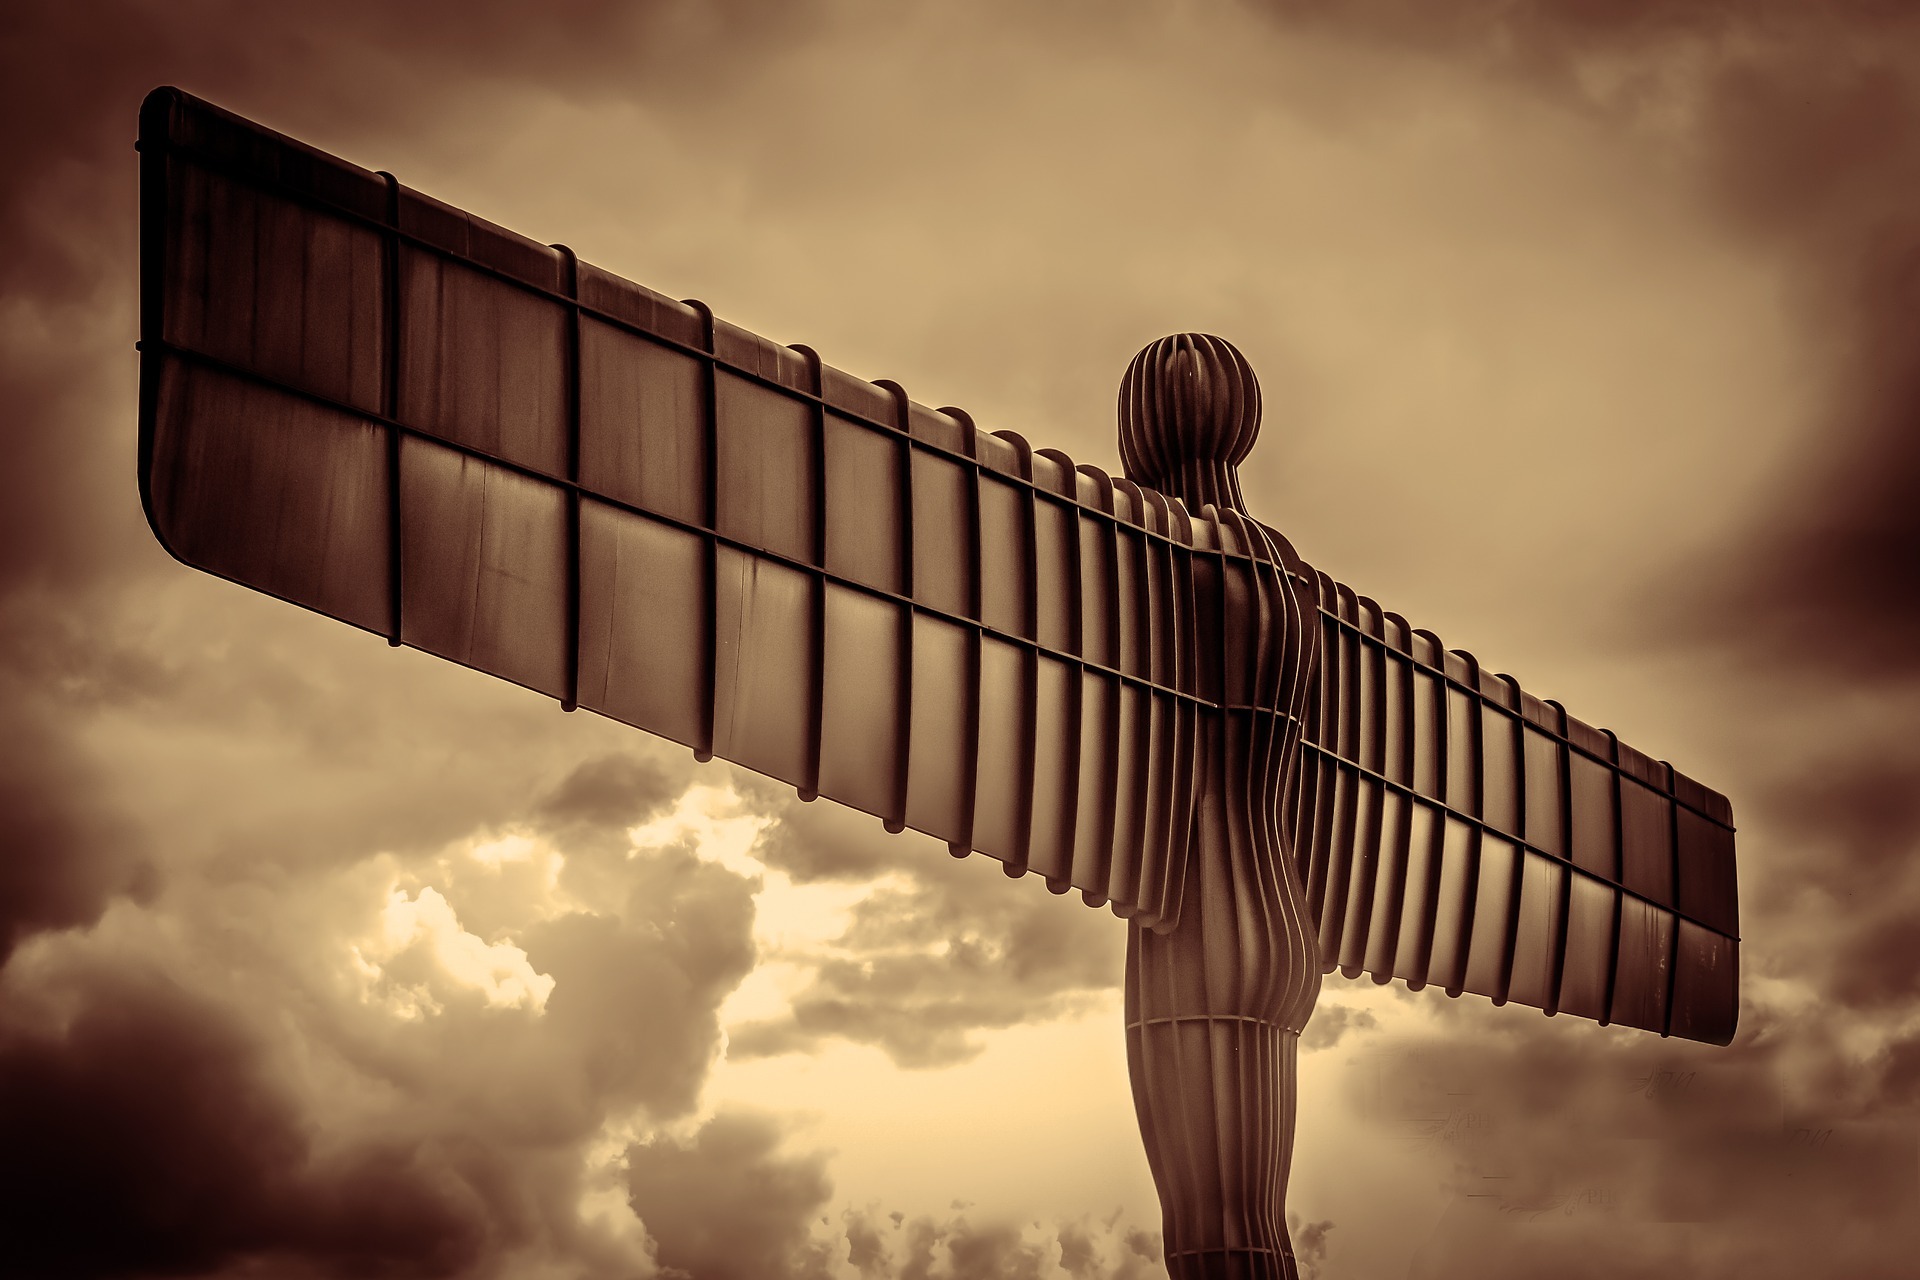 Back of the Angel of the North